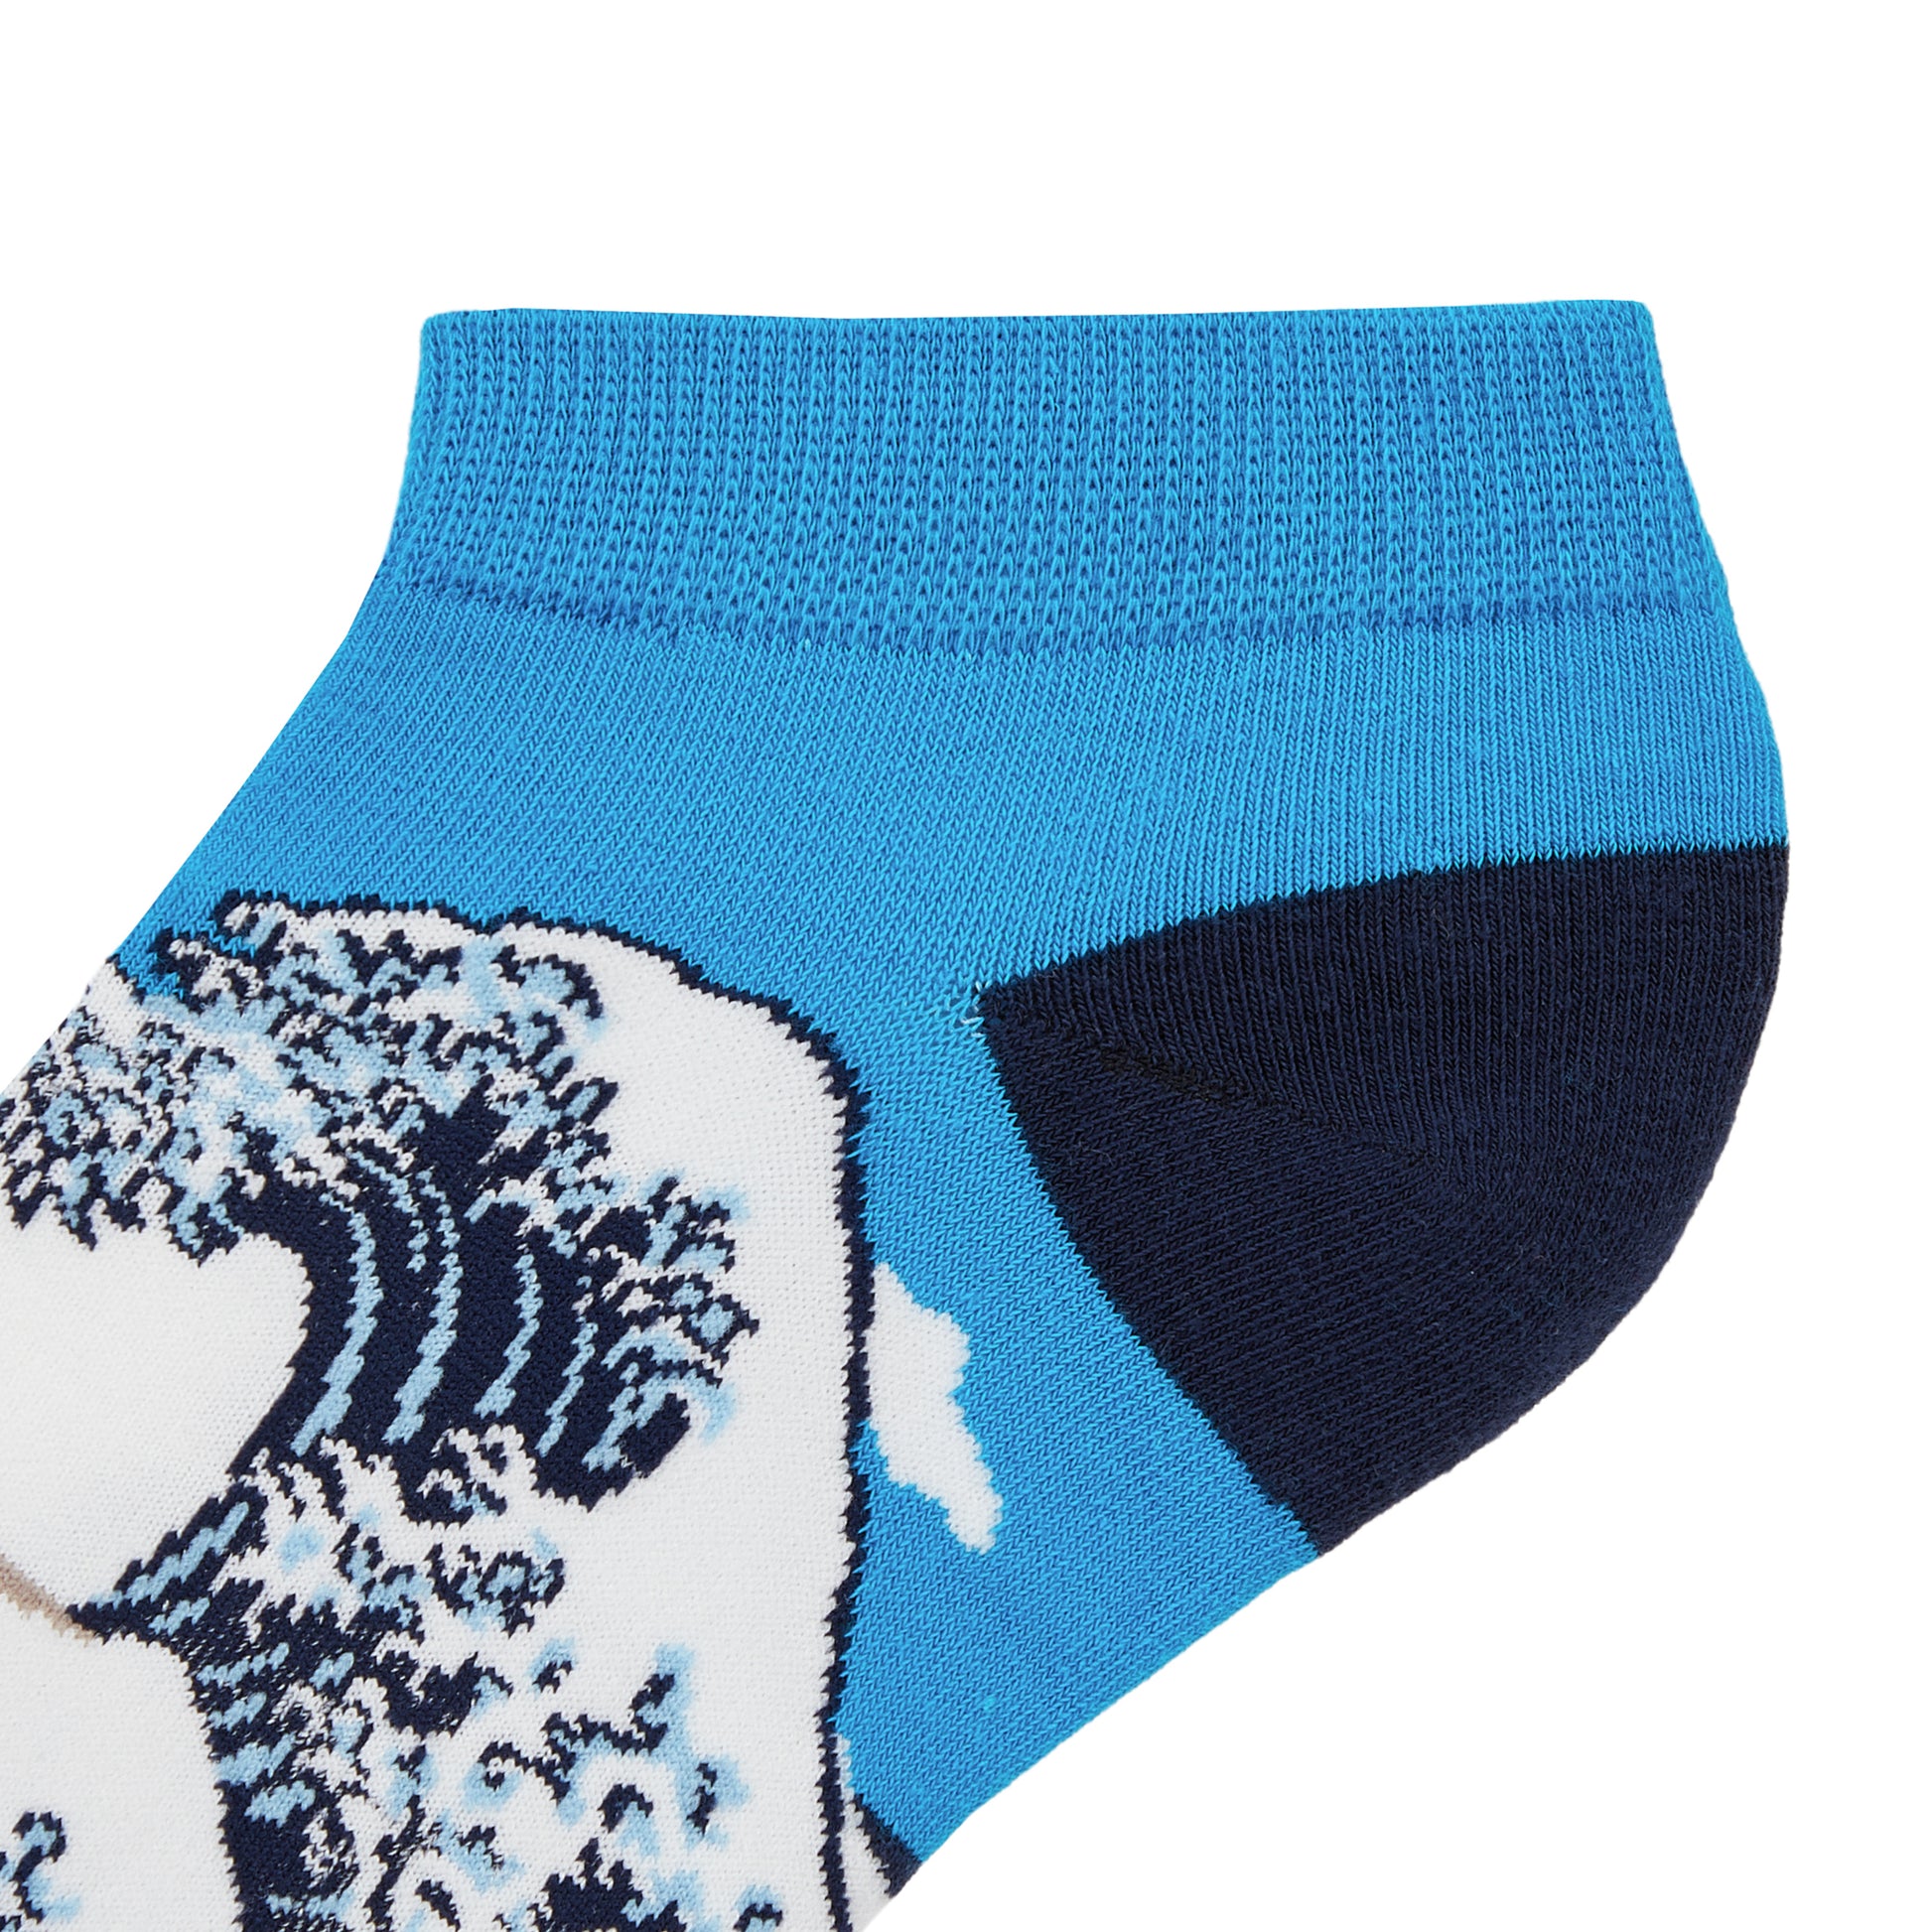 The Great Wave Off Kanagawa Printed Ankle Socks - IDENTITY Apparel Shop